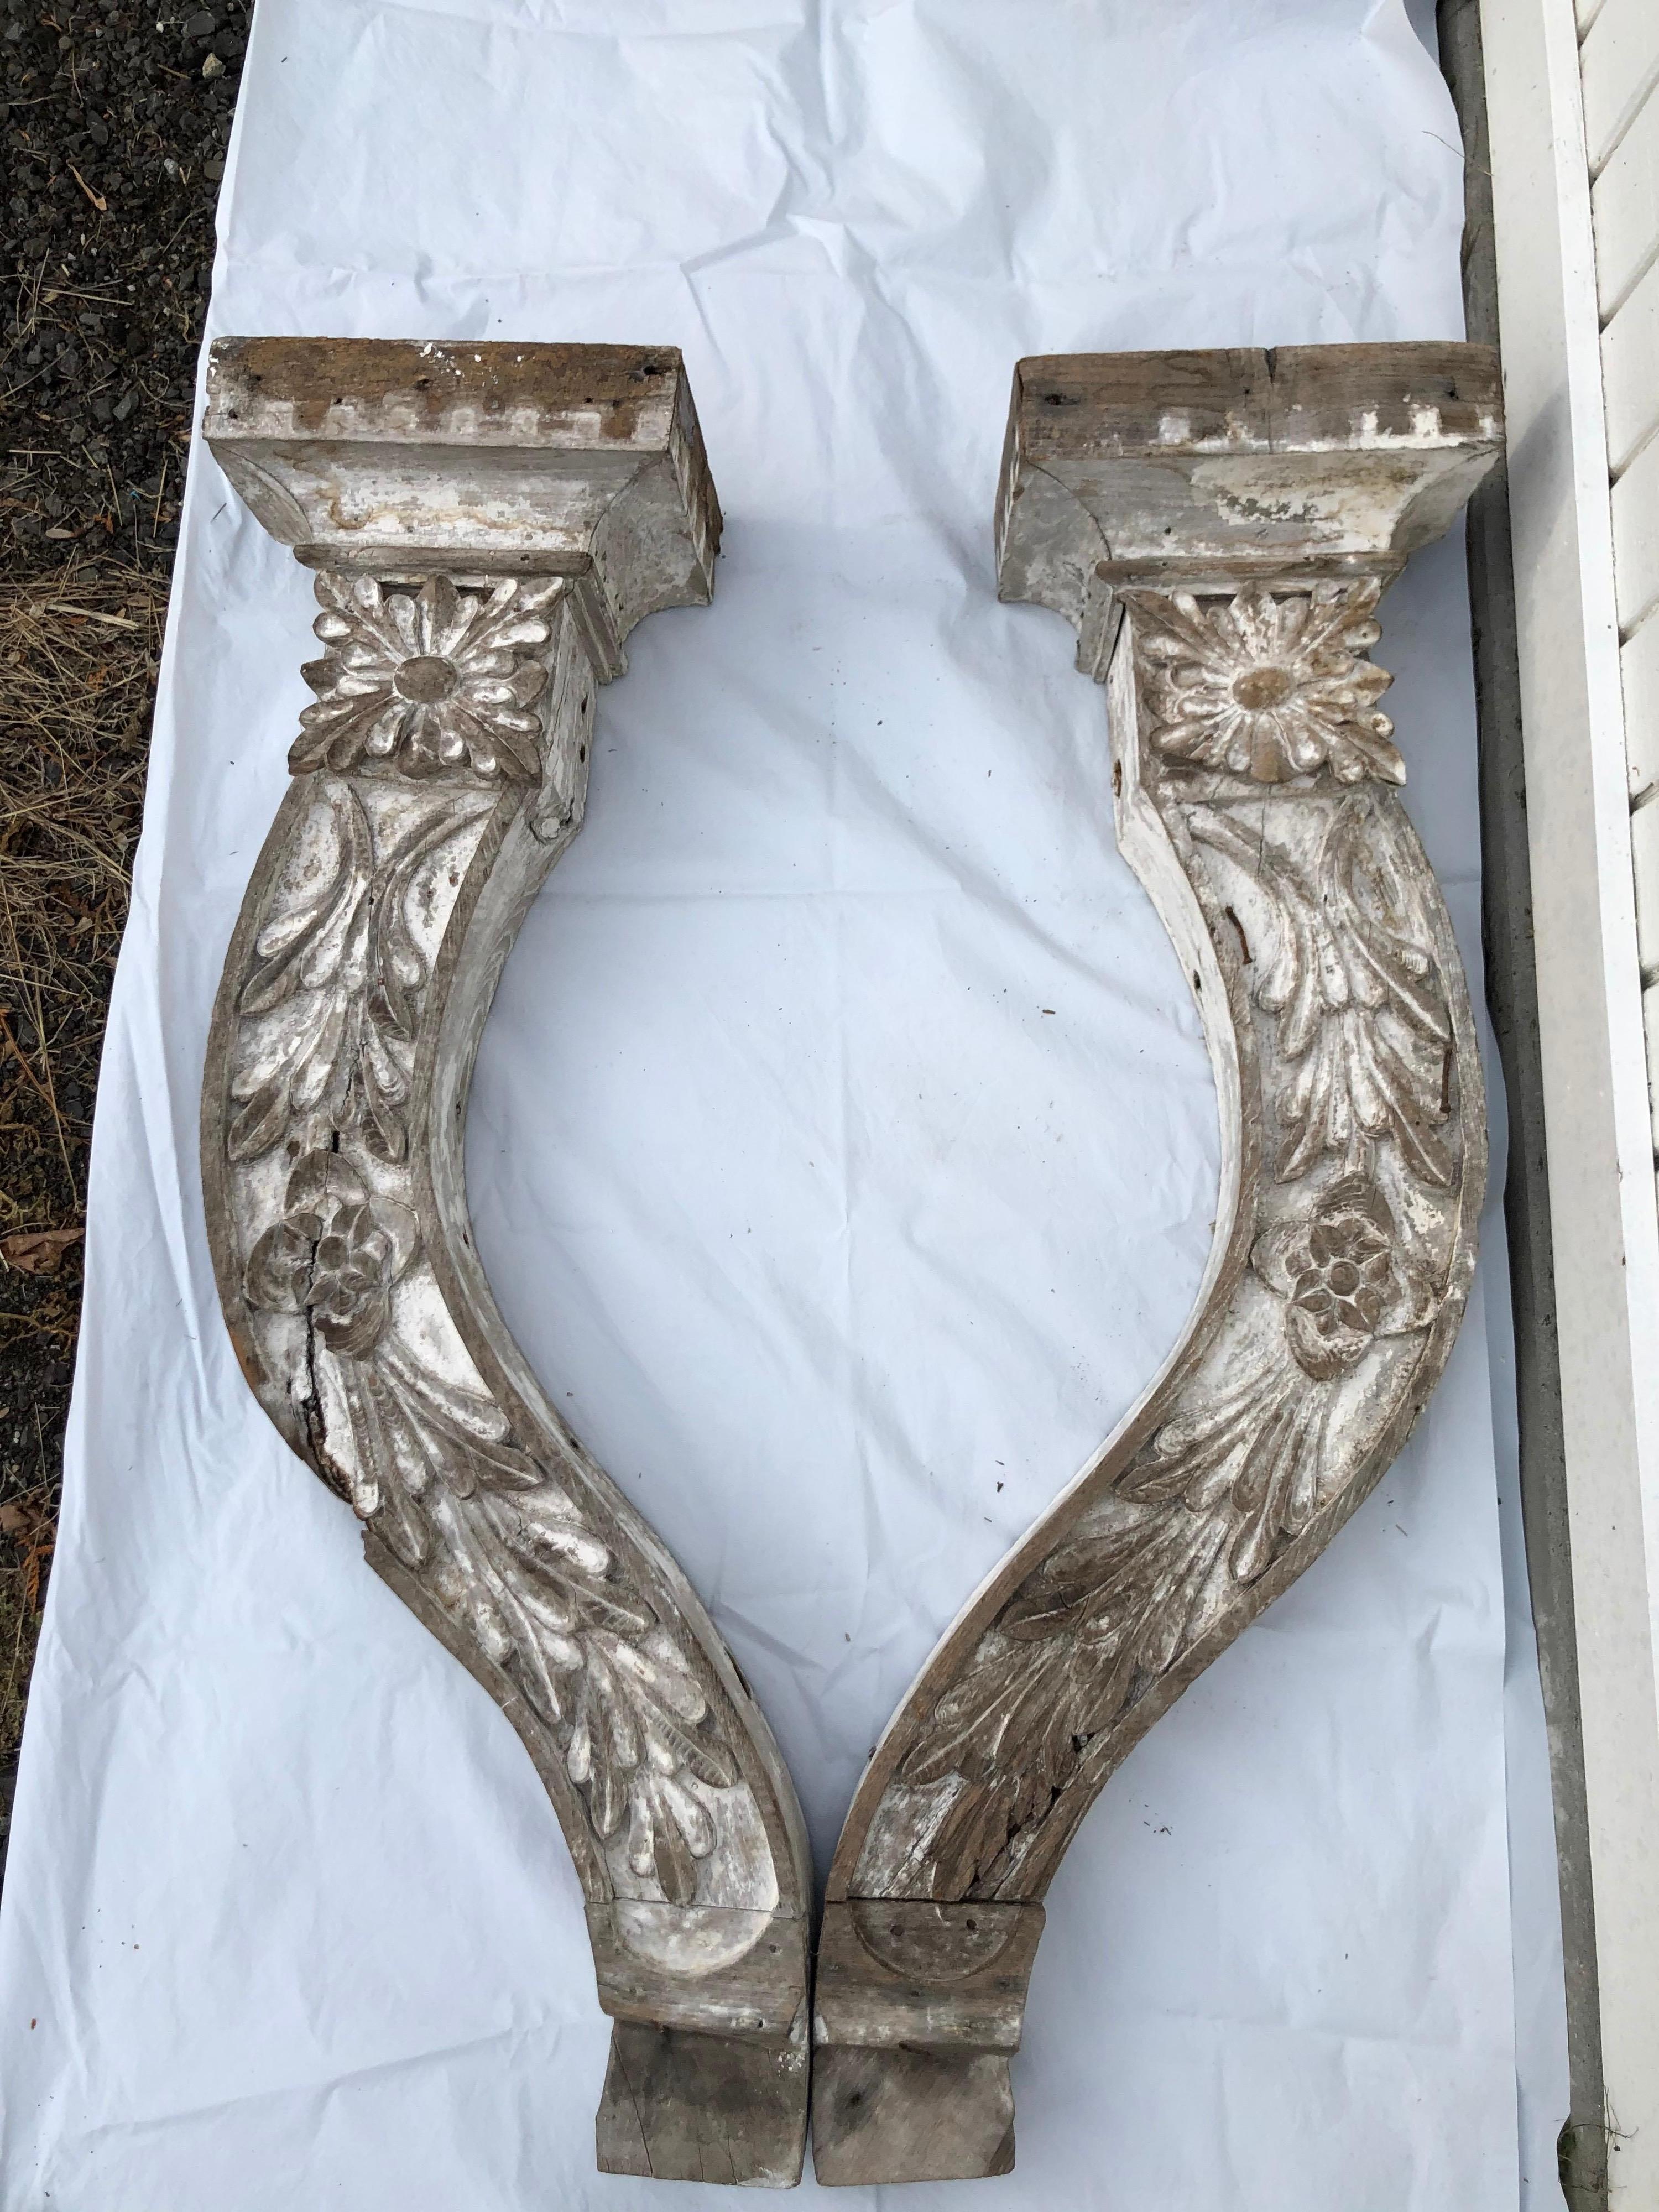 Pair of Large Shabby Chic Farm-House Corbels or Wall Sconces. Price is for the pair . A set of 2.
One of a kind unique decorative wall piece. Use as brackets to connect a shelf top with. Perfect for that country farmhouse or shabby chic beach house.